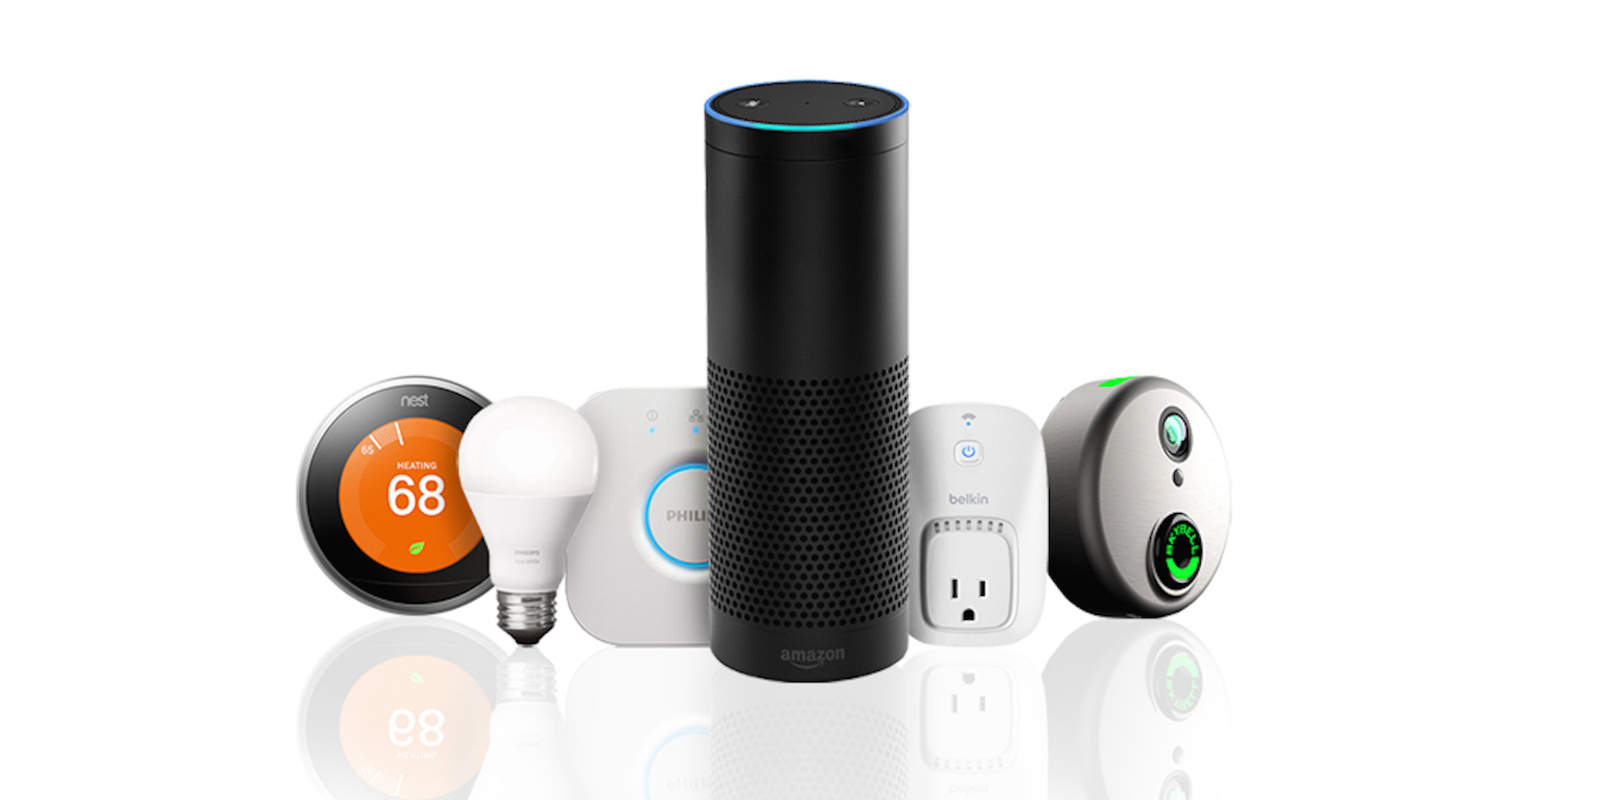 Enter to win a suite of smart home products, centered around Amazon Echo.